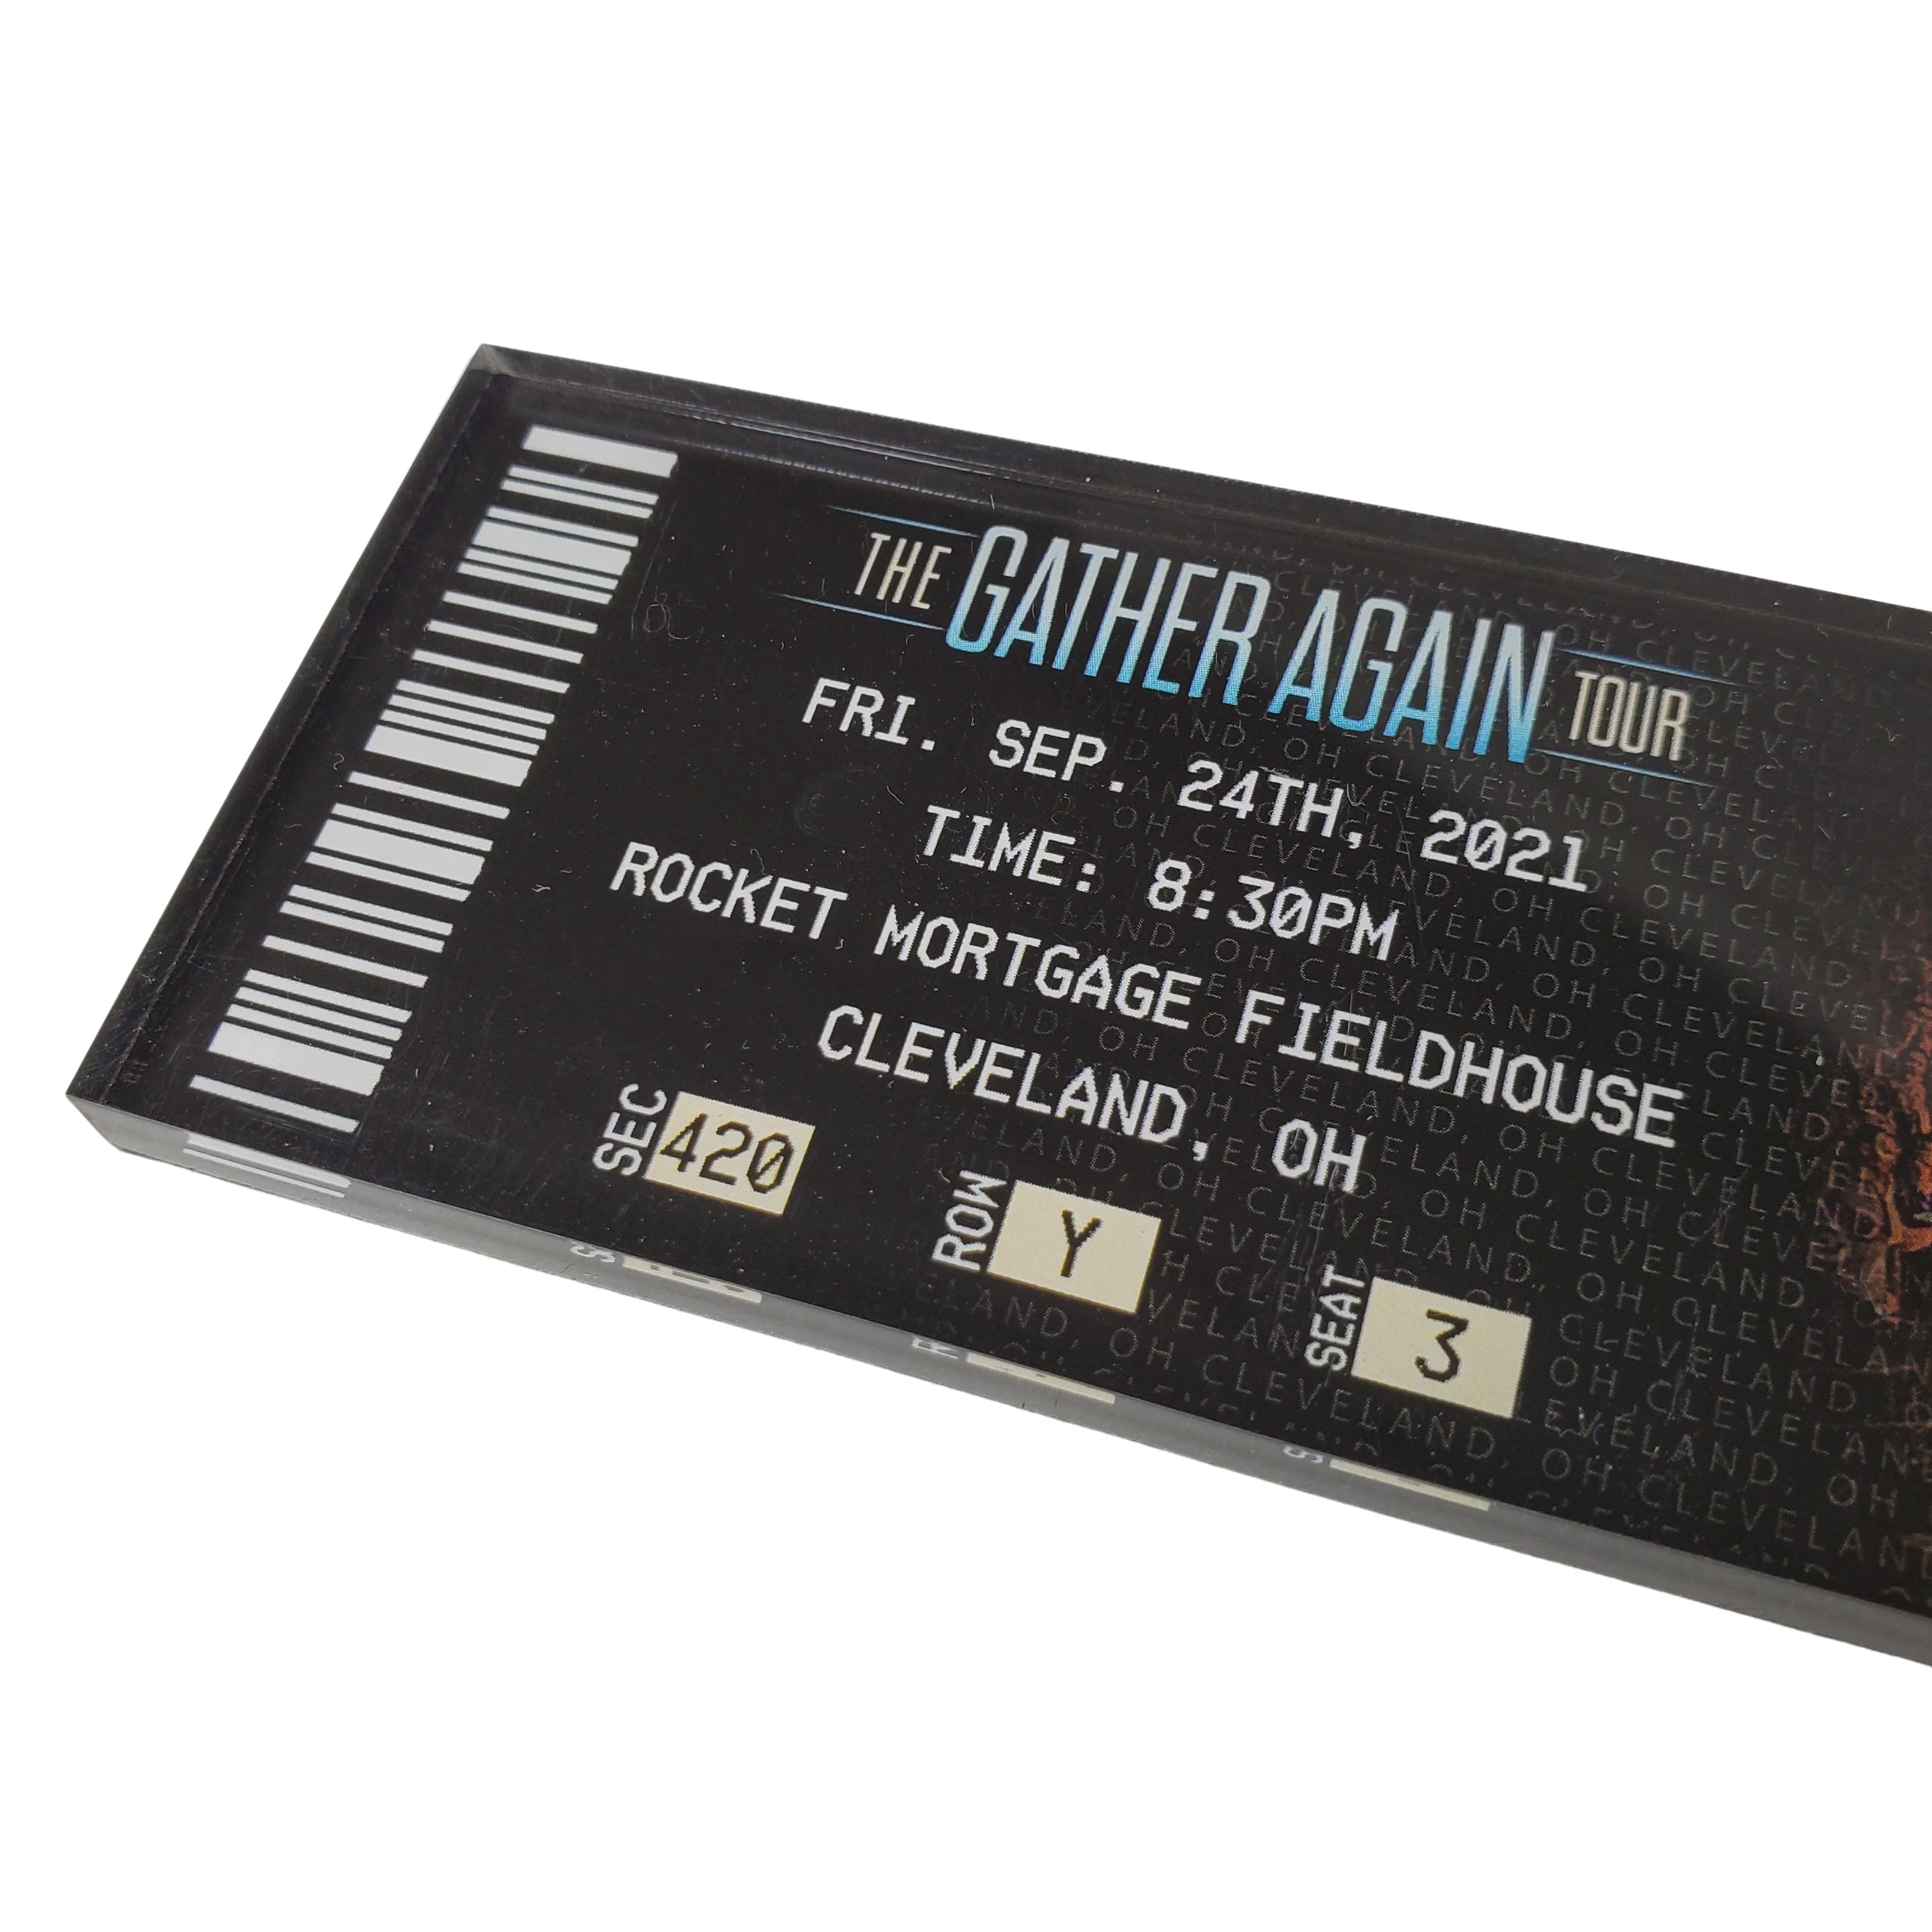 Gather Again Tour Ticket Magnet - Cleveland, OH